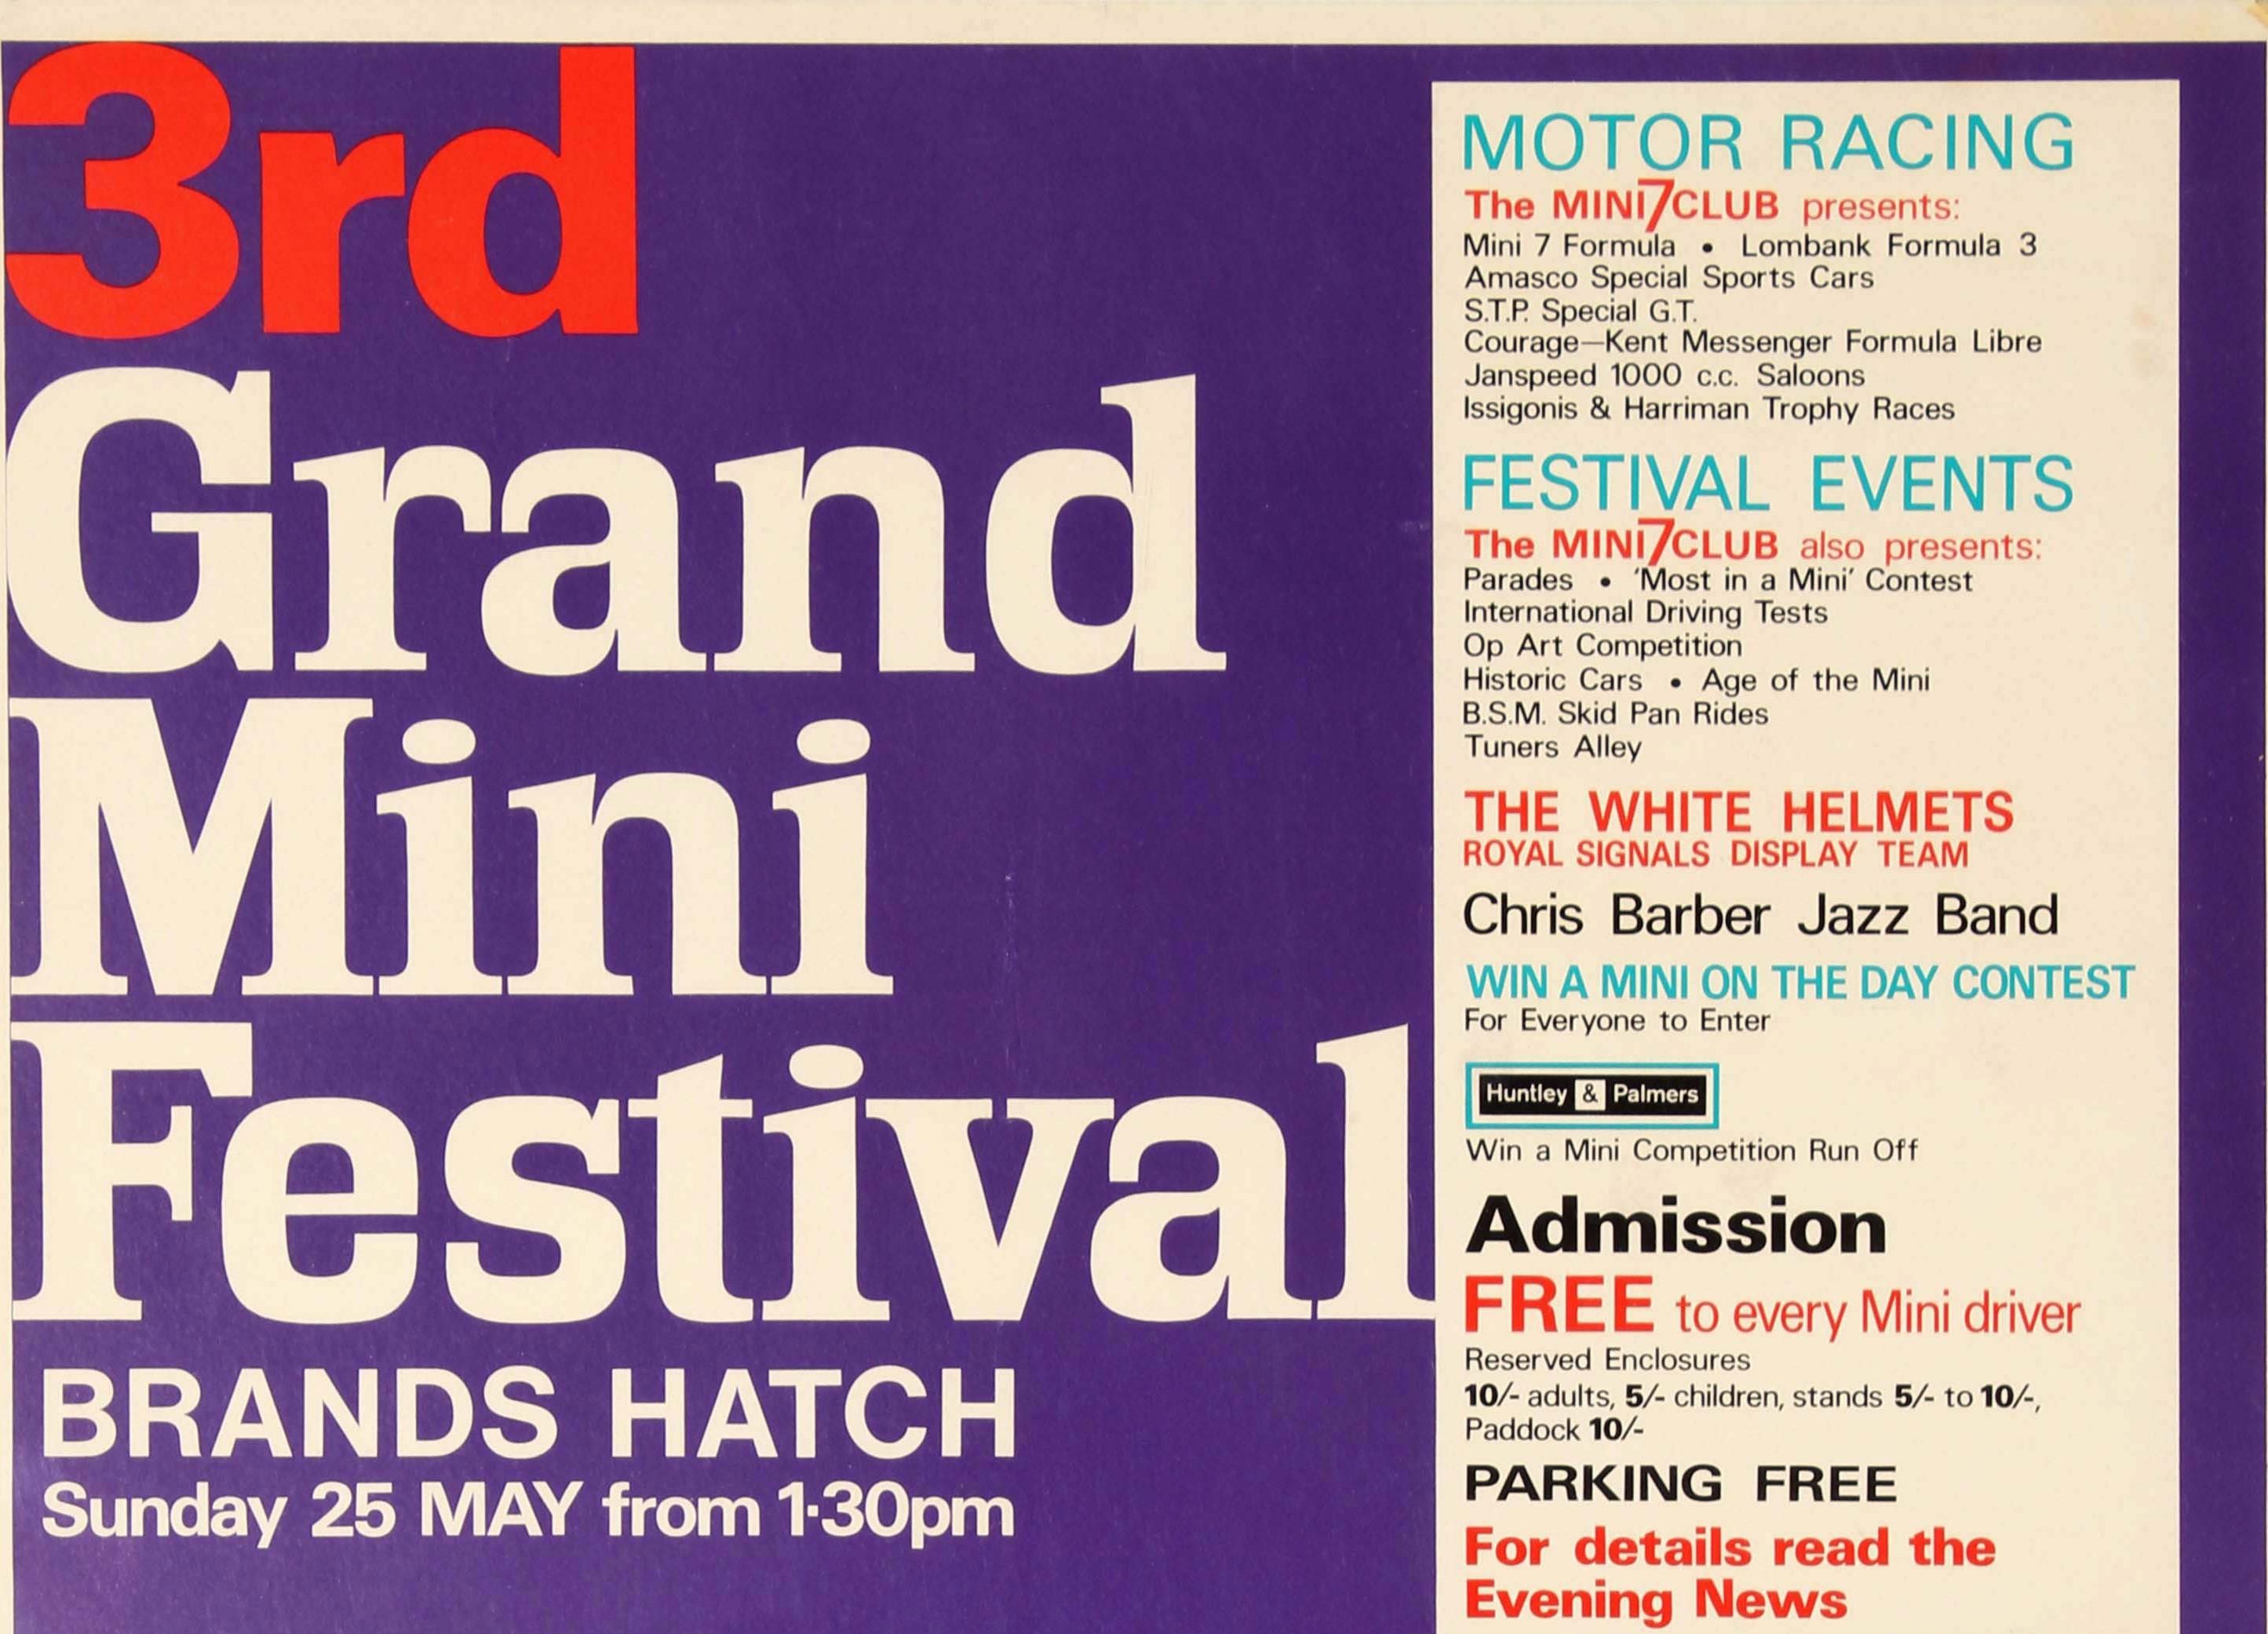 Original vintage advertising poster promoting the 3rd Grand Mini Festival held at the Brands Hatch race circuit on Sunday 25 May from 1.30pm. Colorful sixties design featuring mini cars and their owners in different styles - the Art-Mini in